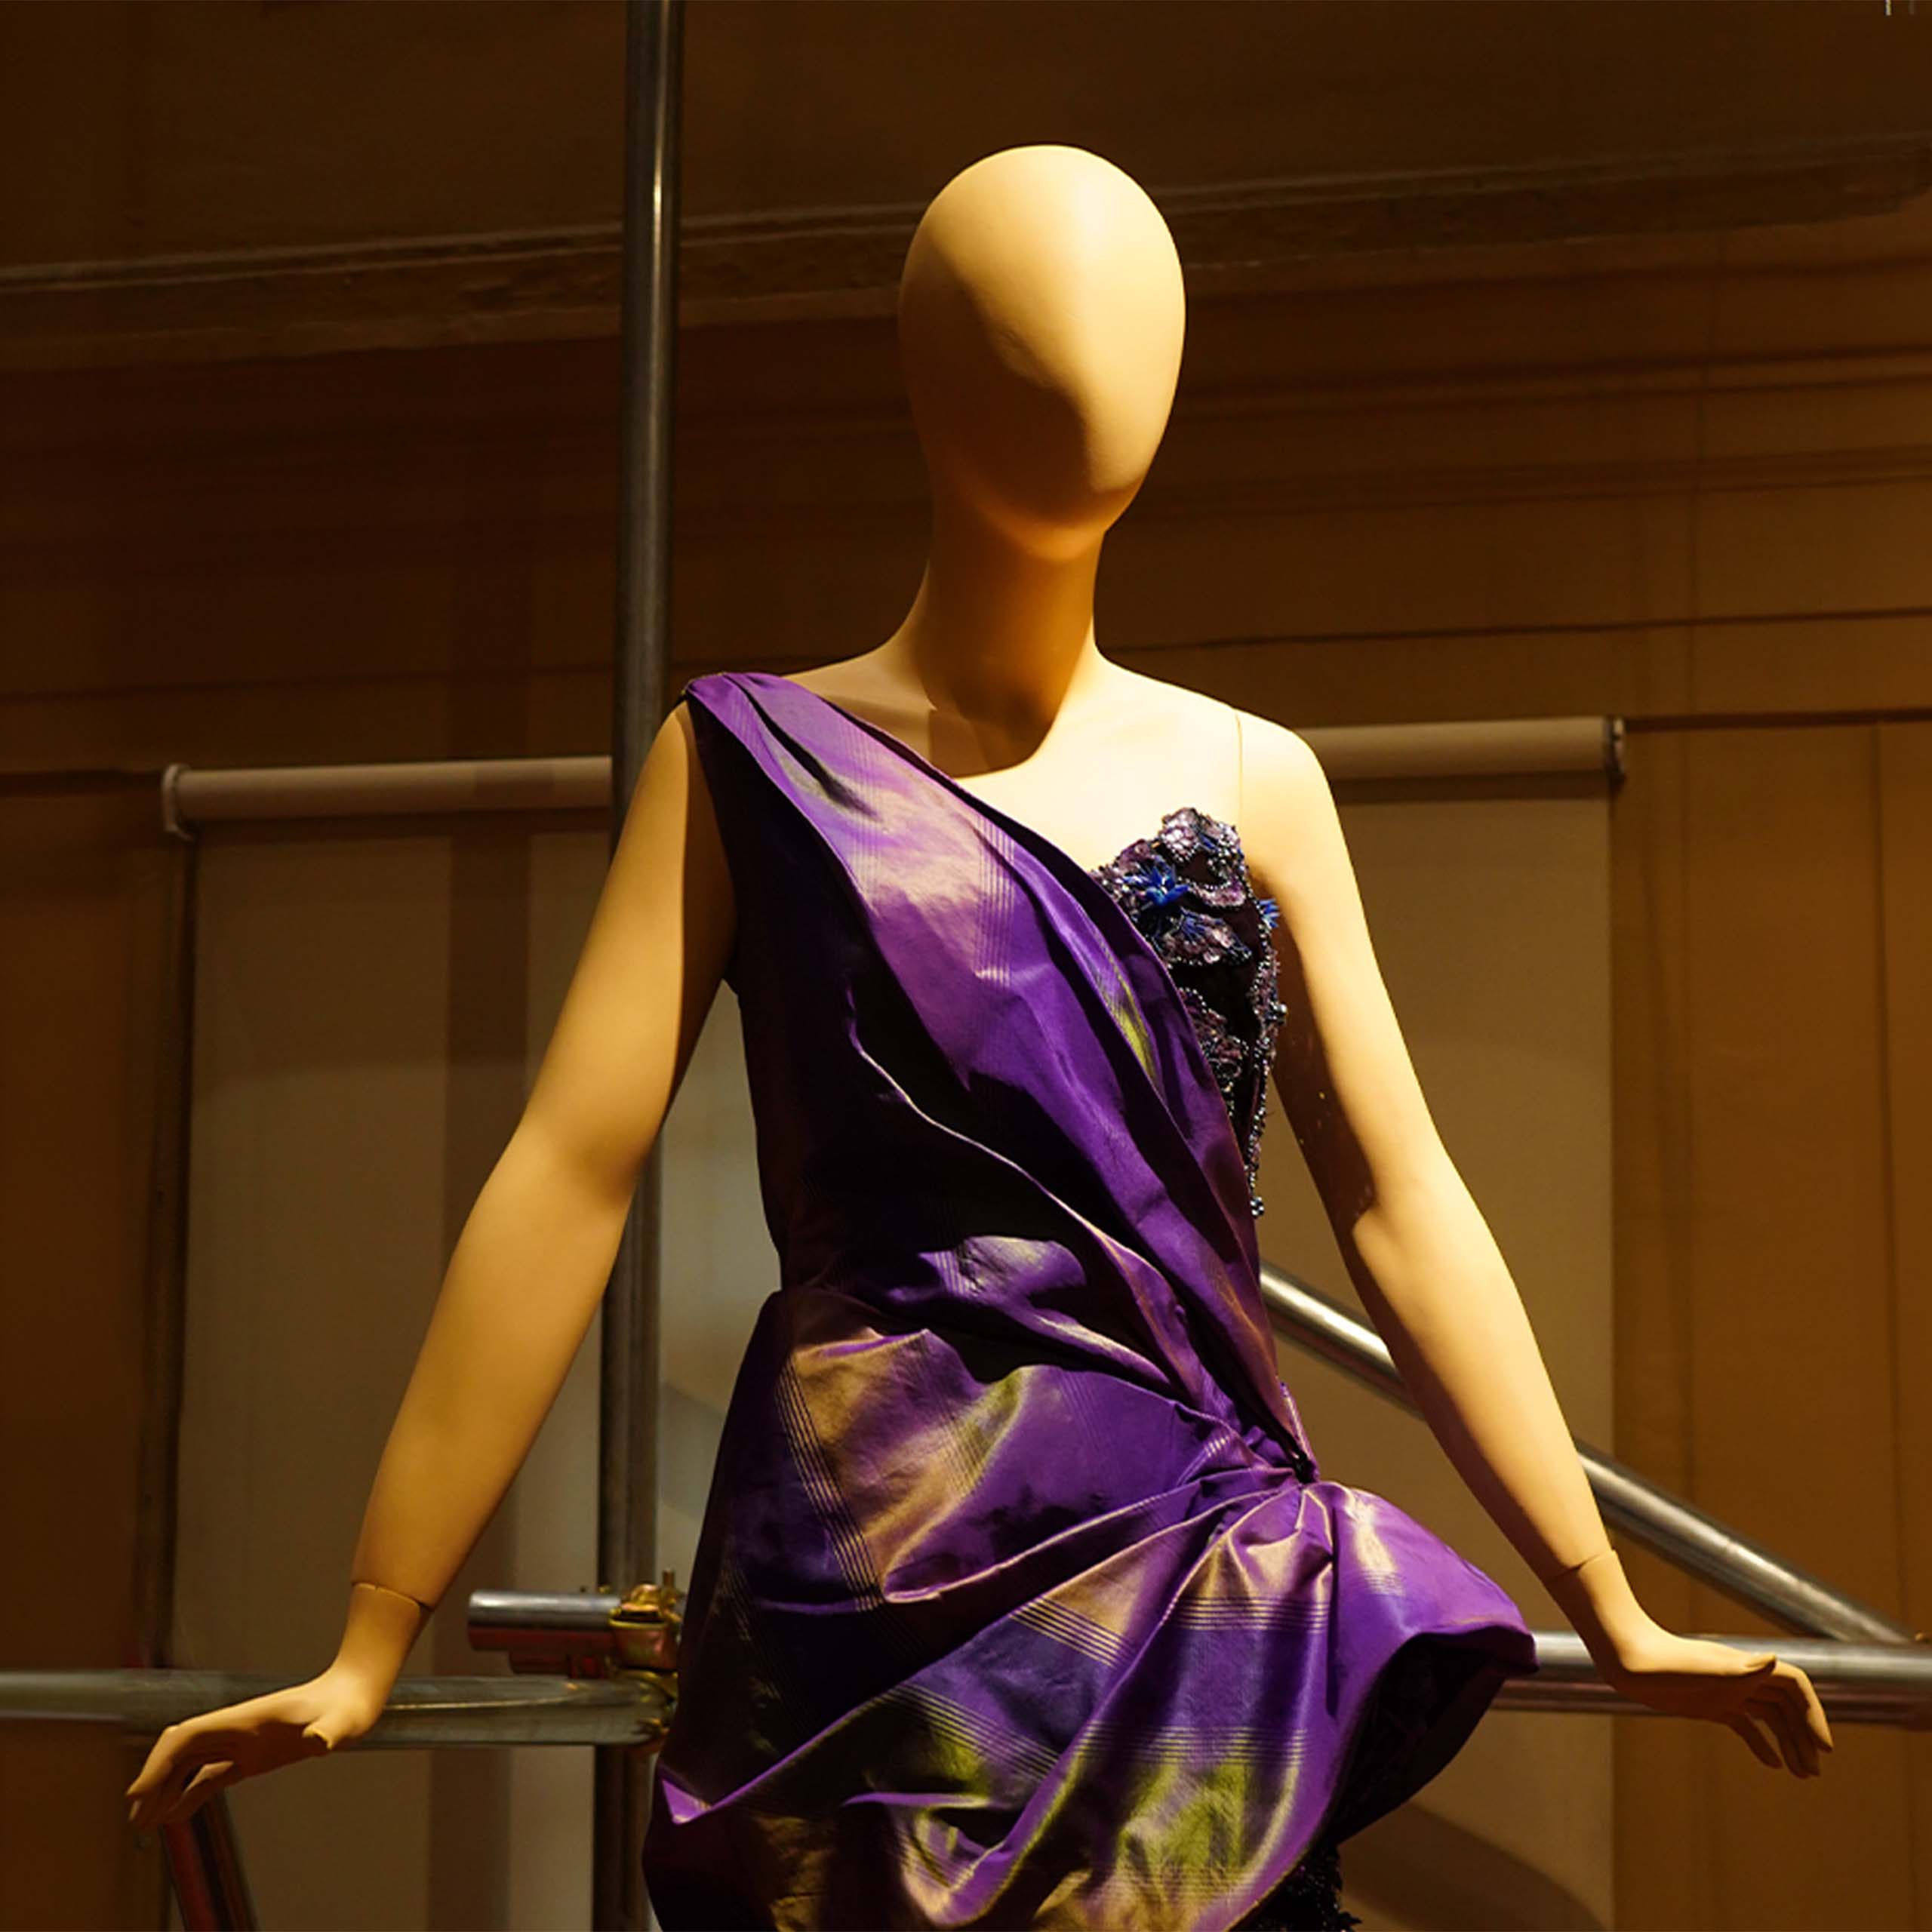 Explore 50 Years of Philippine Design at the National Museum of Fine Arts